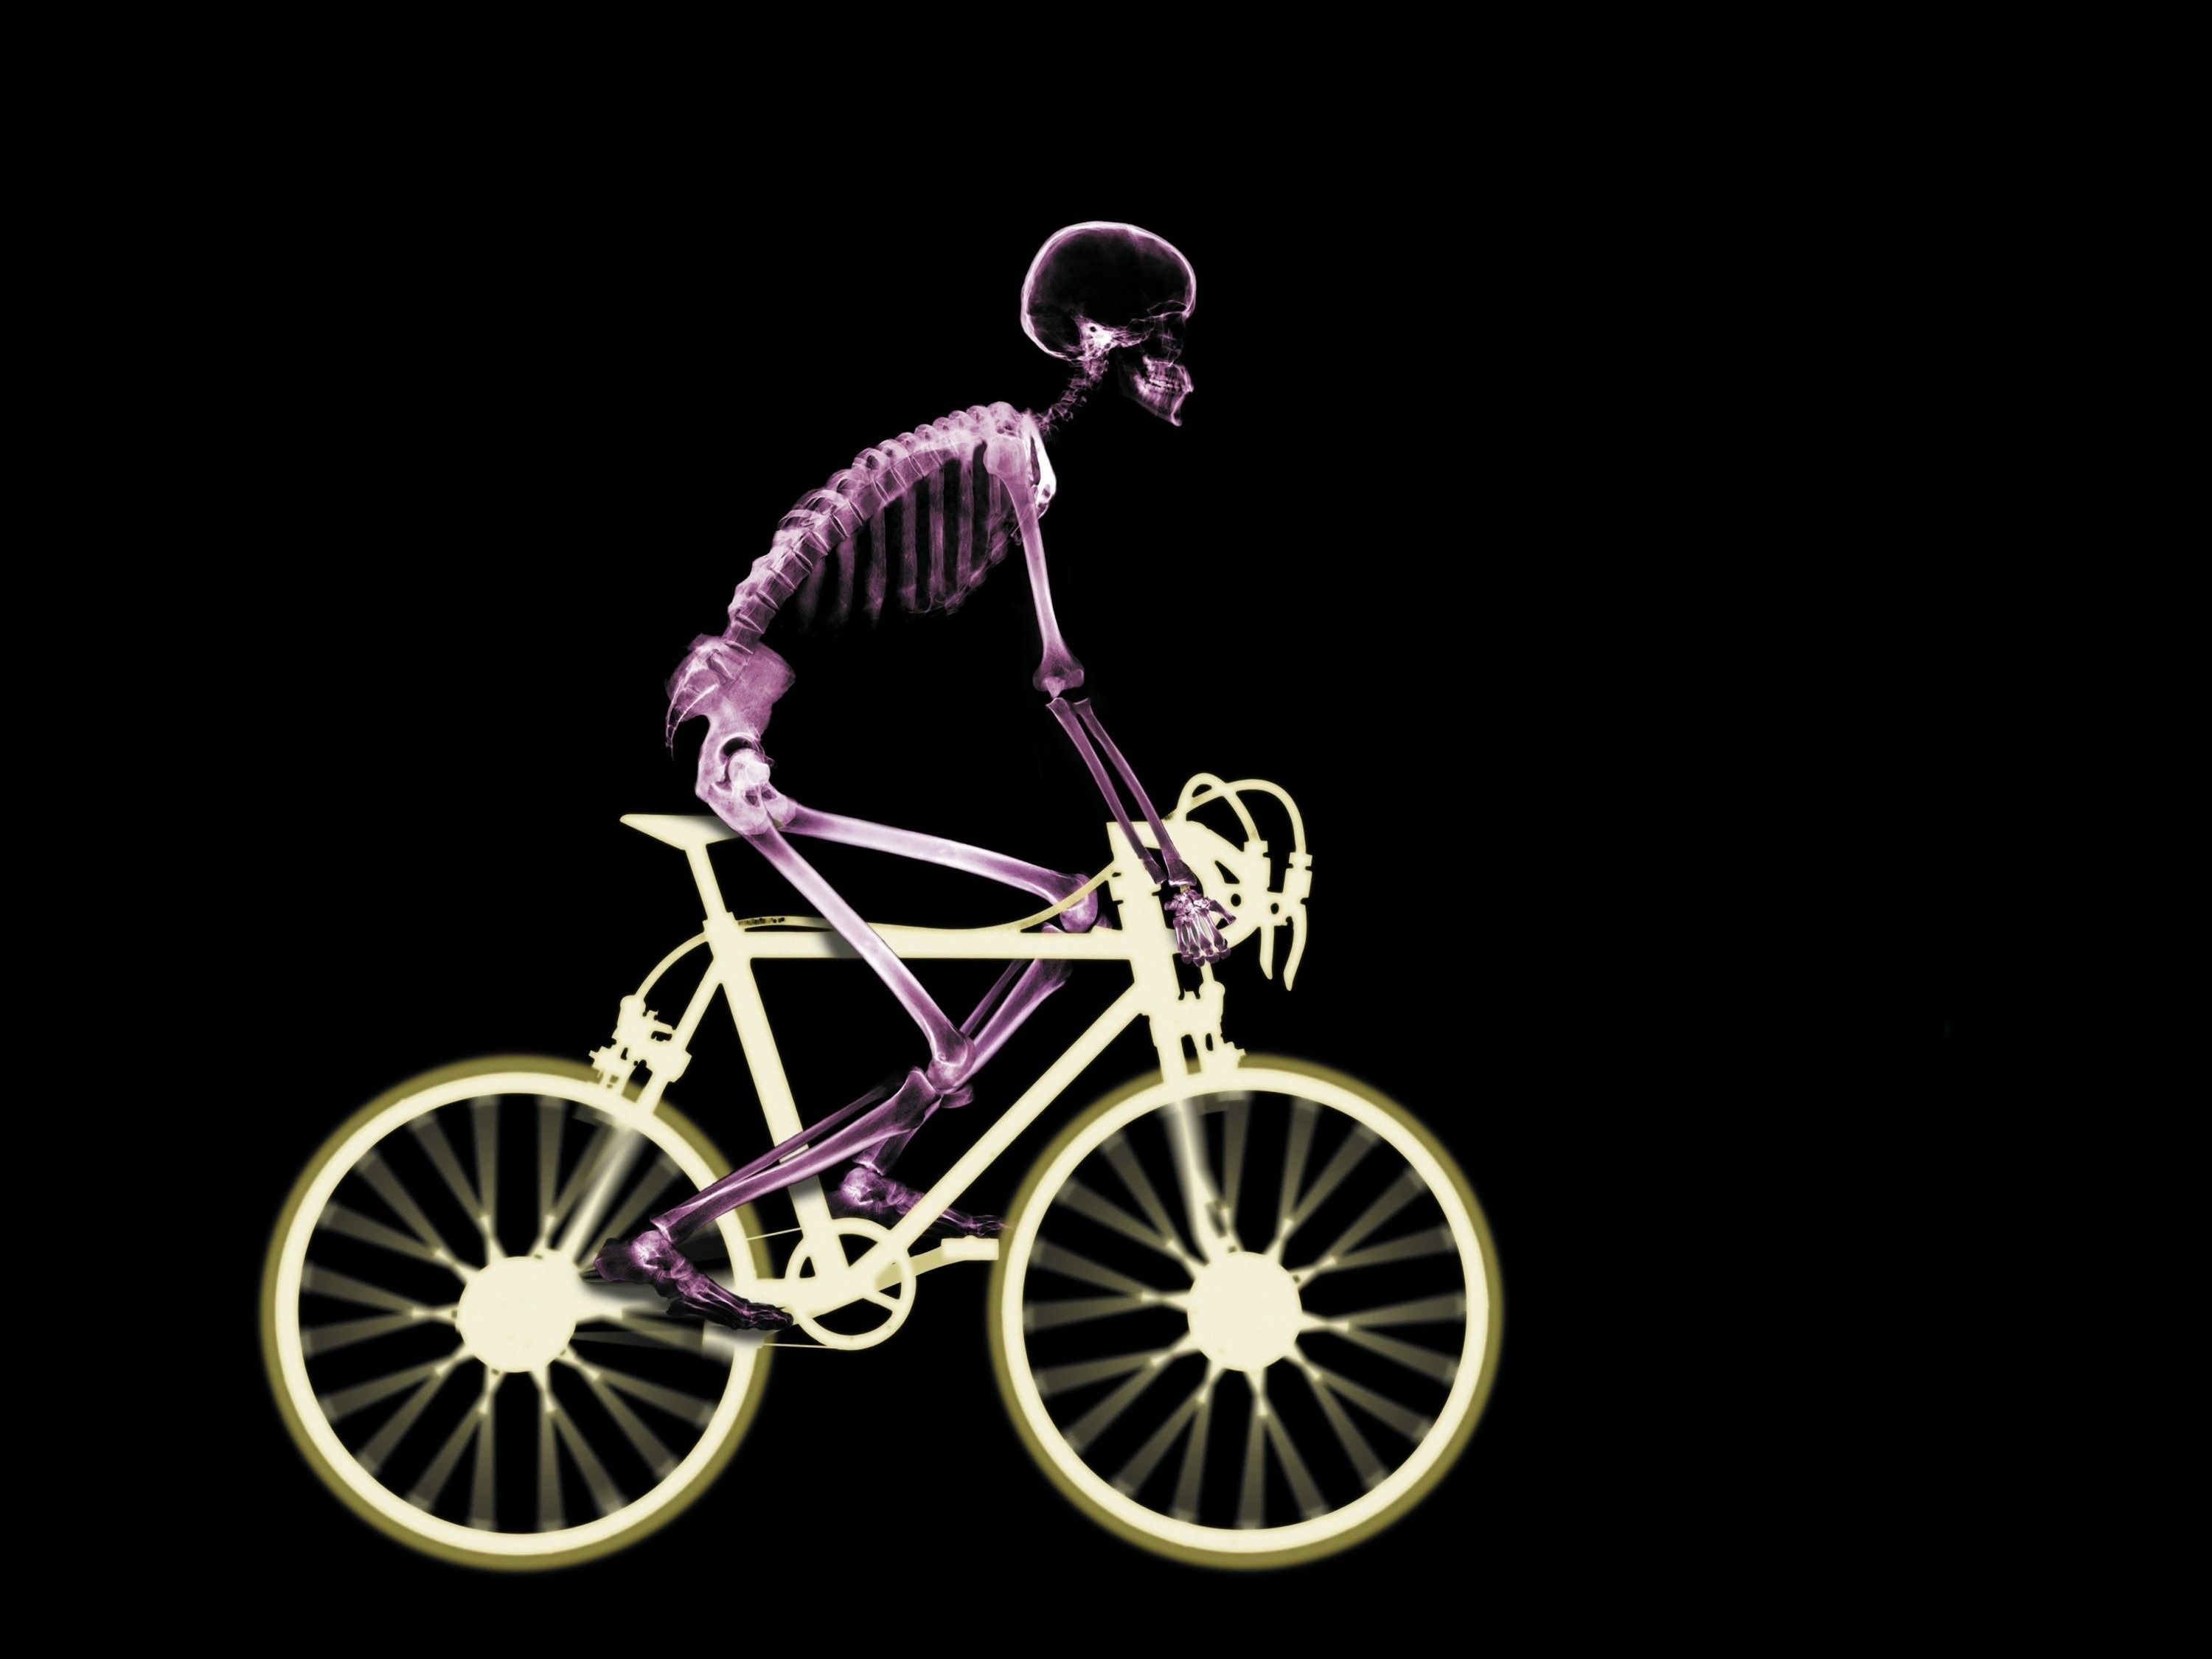 Wallpaper. Creative. photo. picture. skeleton, skinny cyclist